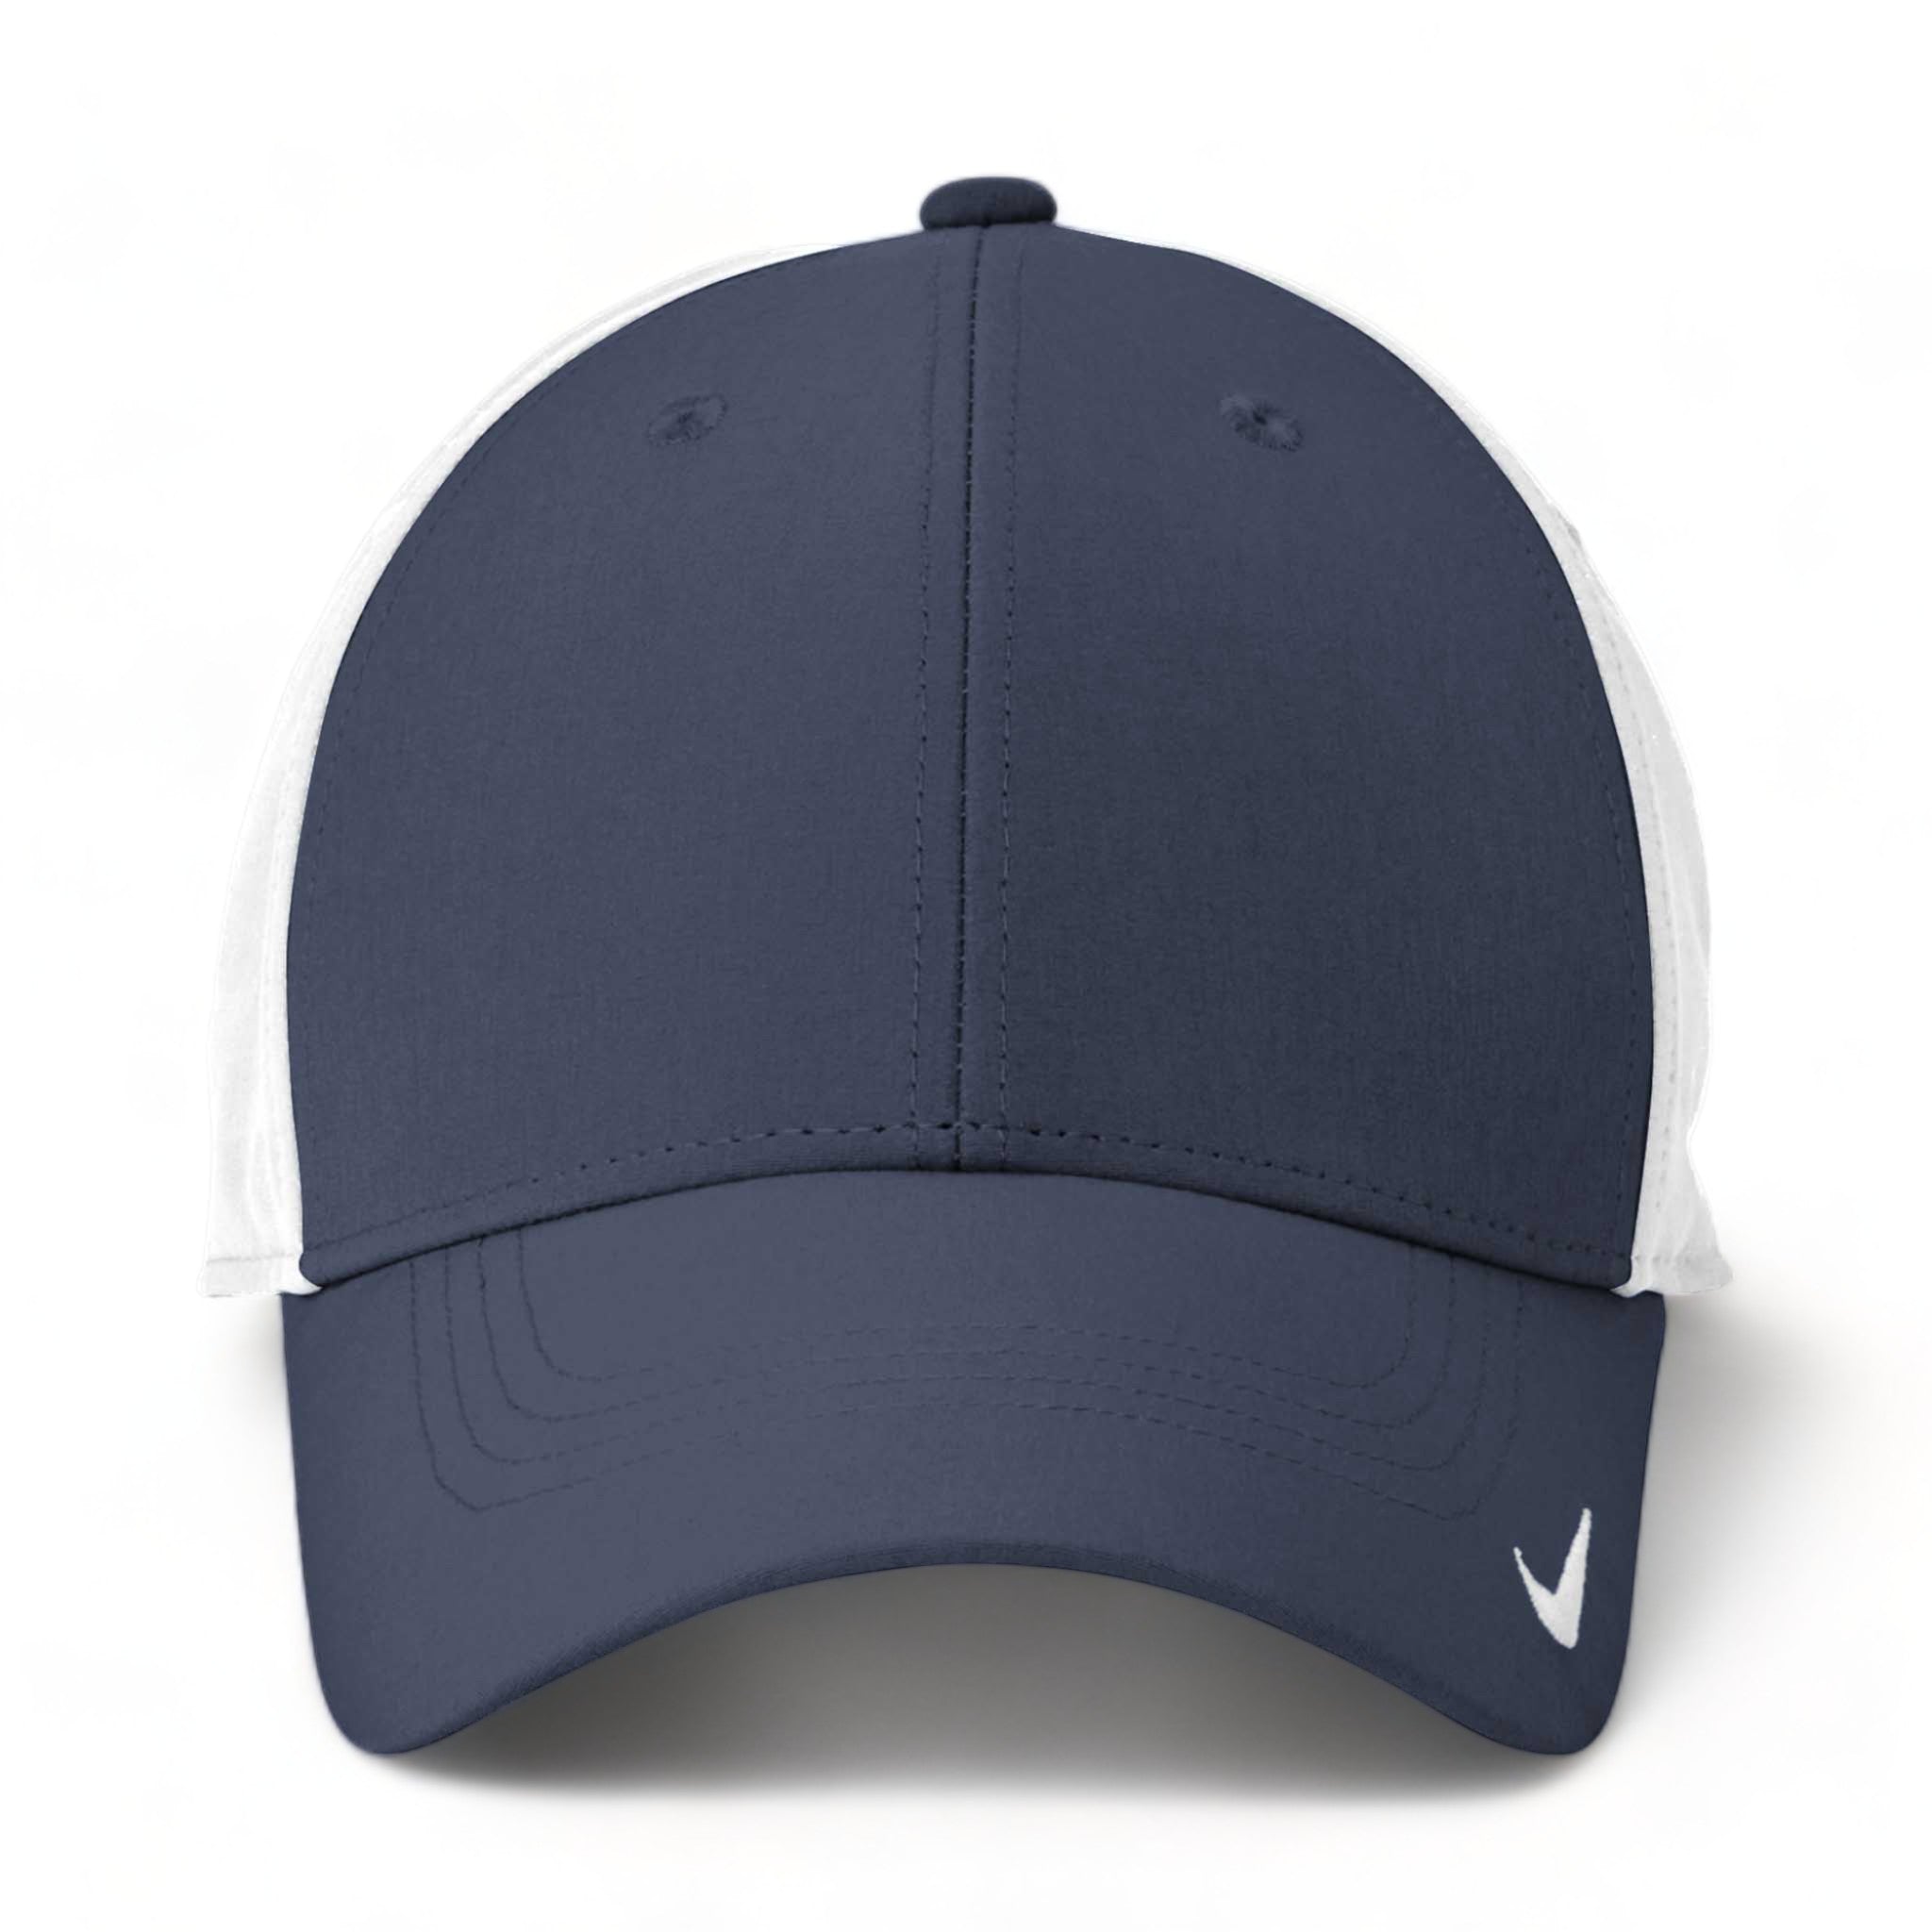 Front view of Nike NKFB6447 custom hat in navy and white